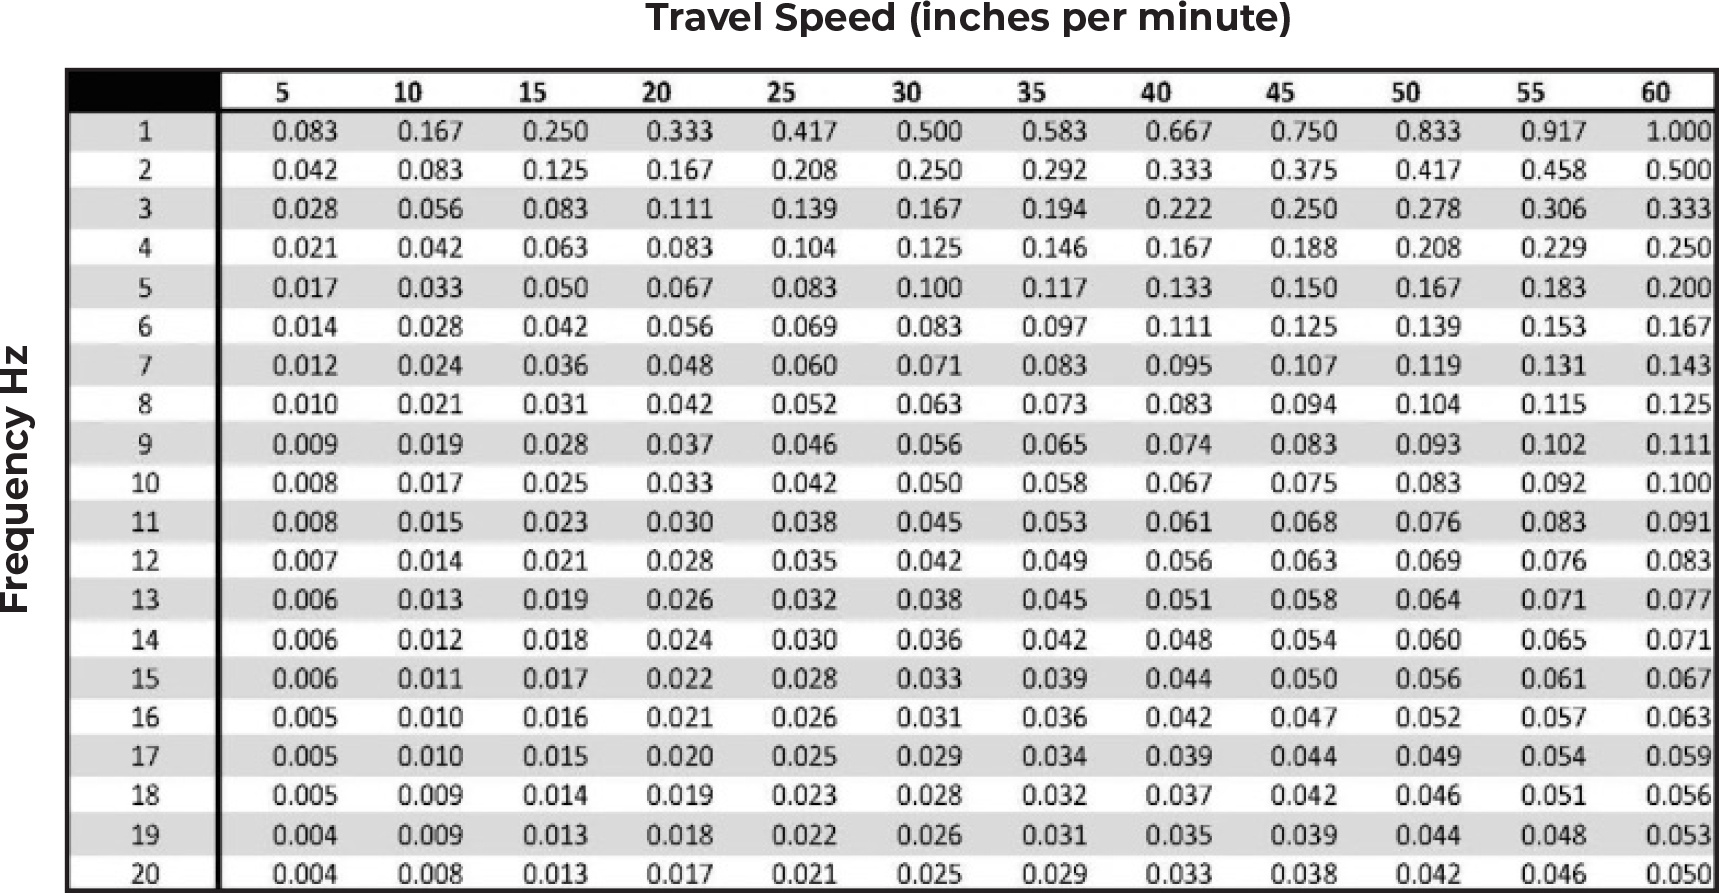 Travel-Speed-Inches-Minute